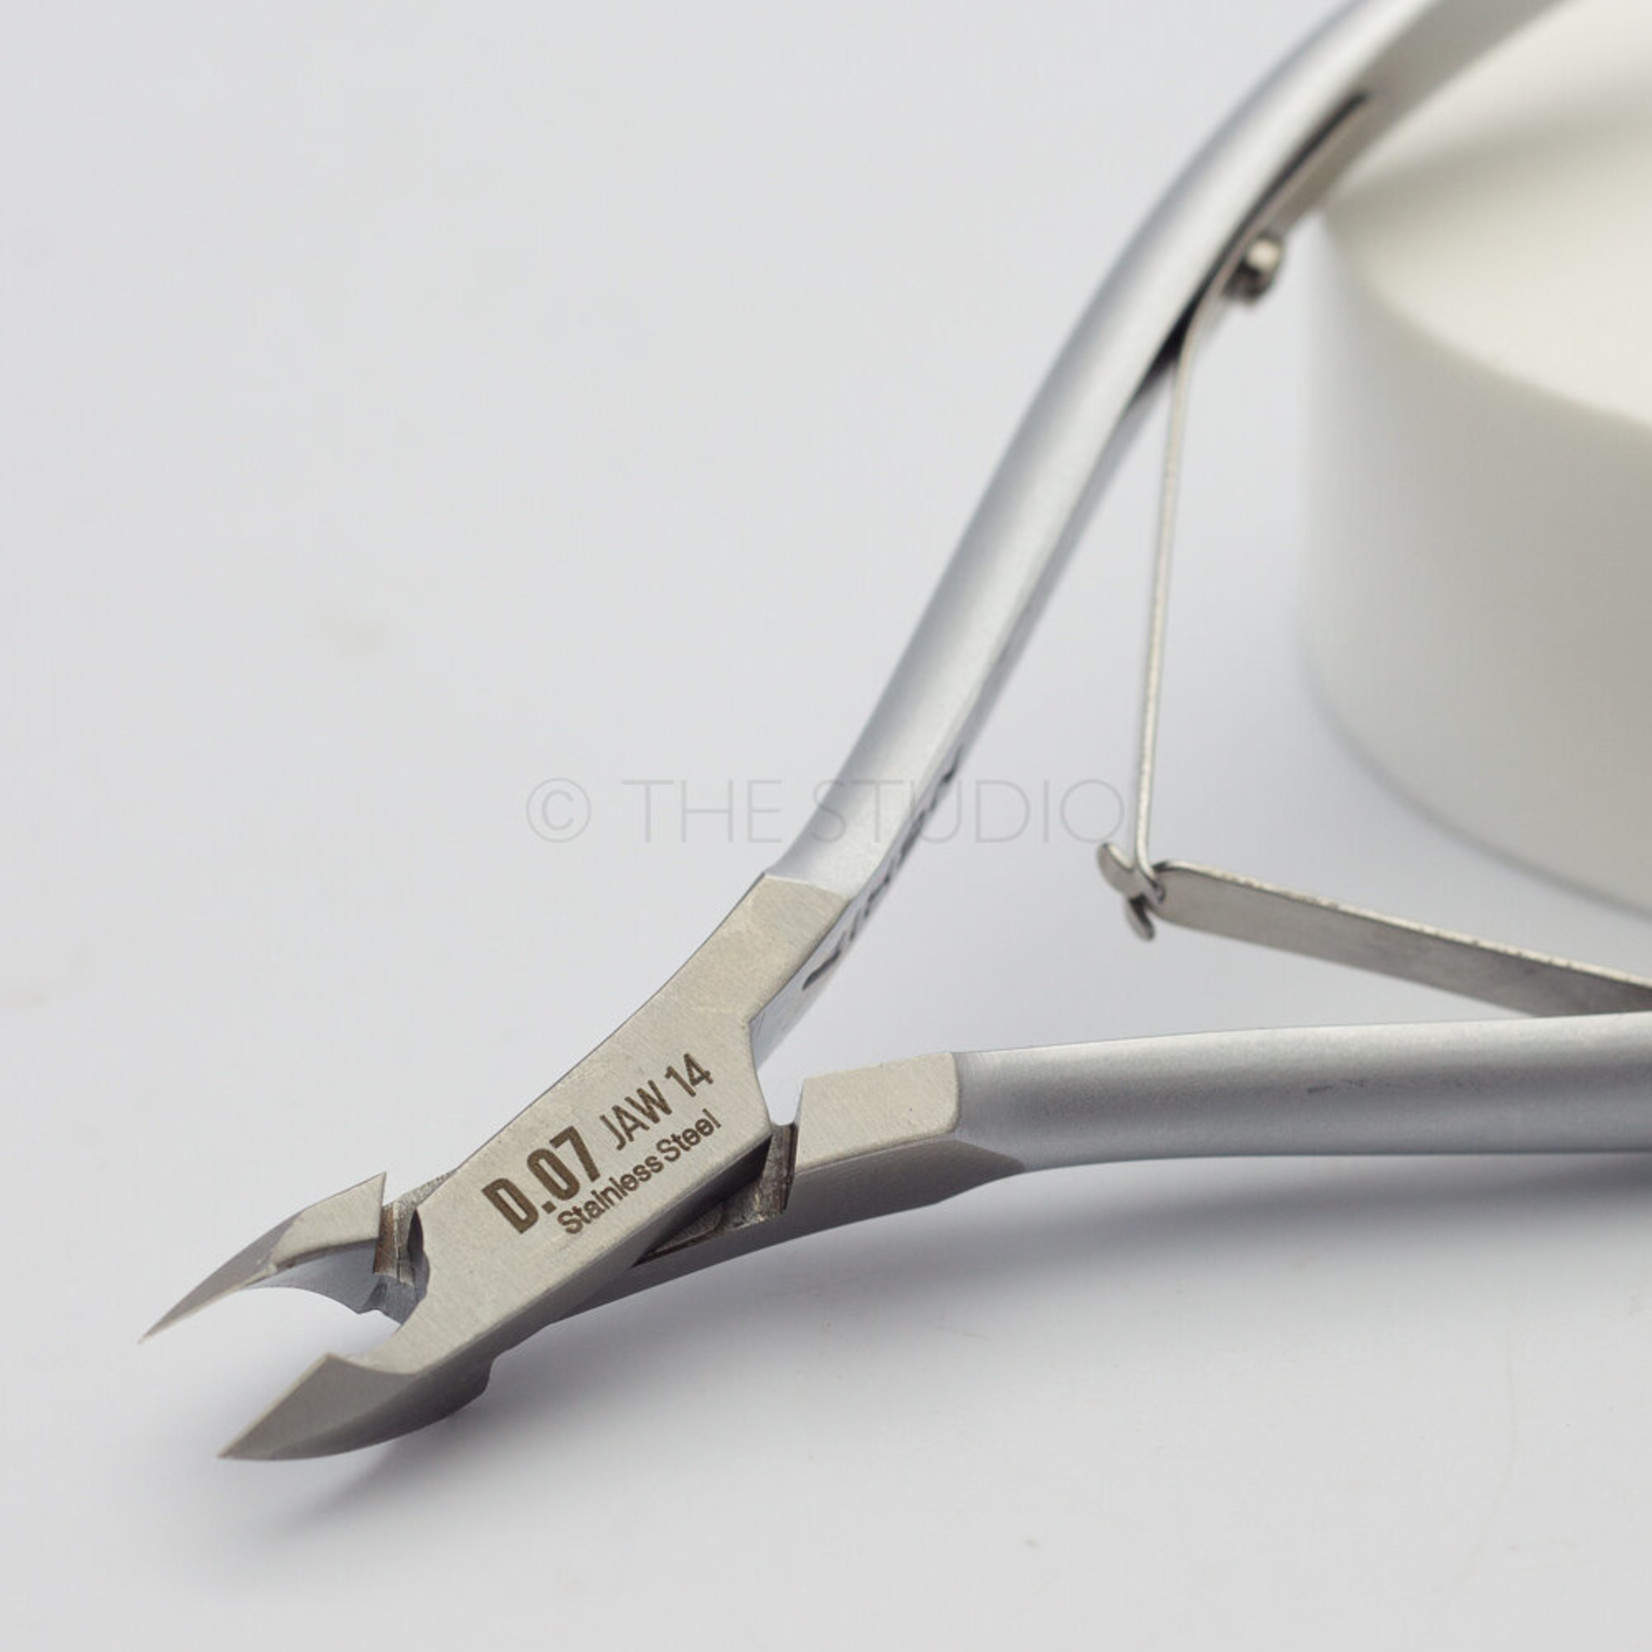 Nghia - Stainless Steel Cuticle Nipper D-07 Jaw 14